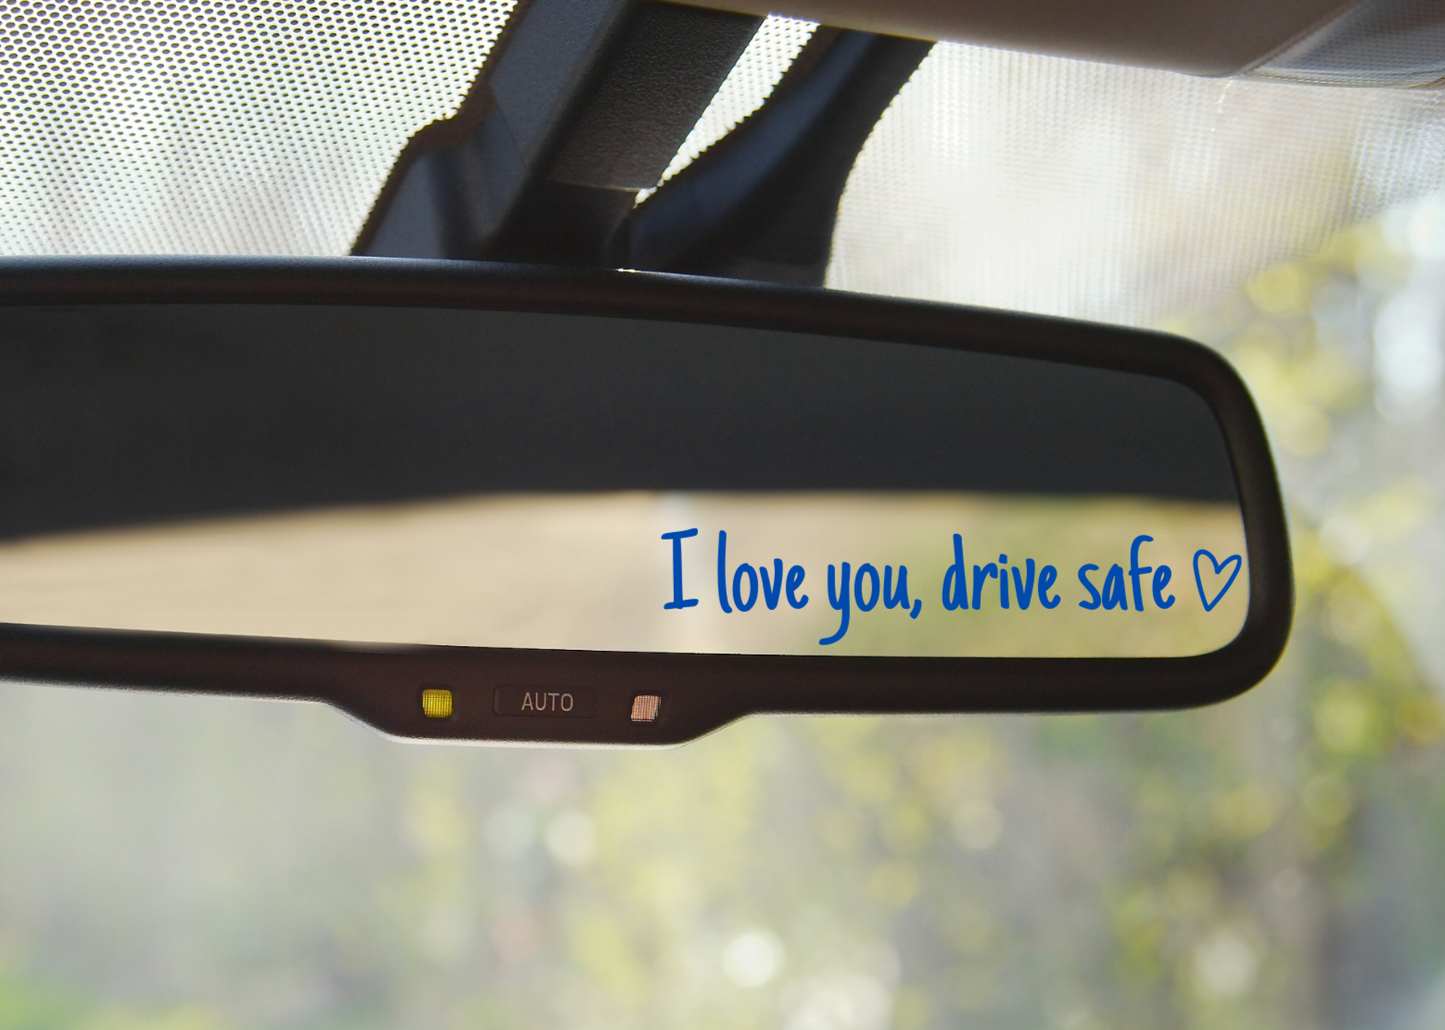 I love you, drive safe rear view mirror decal